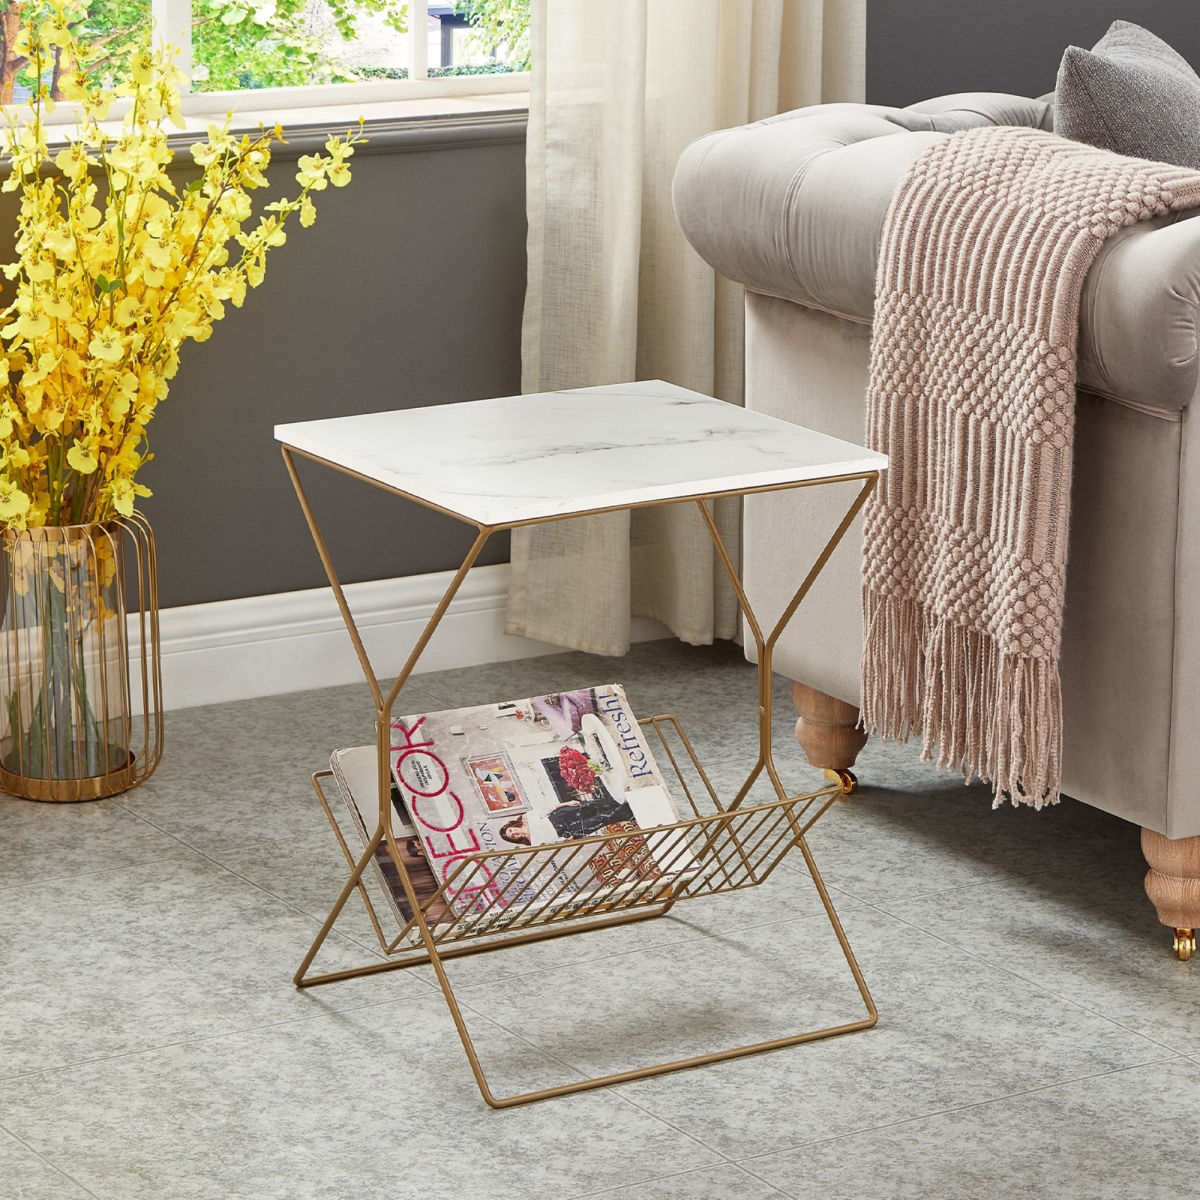 Let213-09we-ue 17 X 15 X 22 In. Quinton End Table - Faux Marble, White & Gold